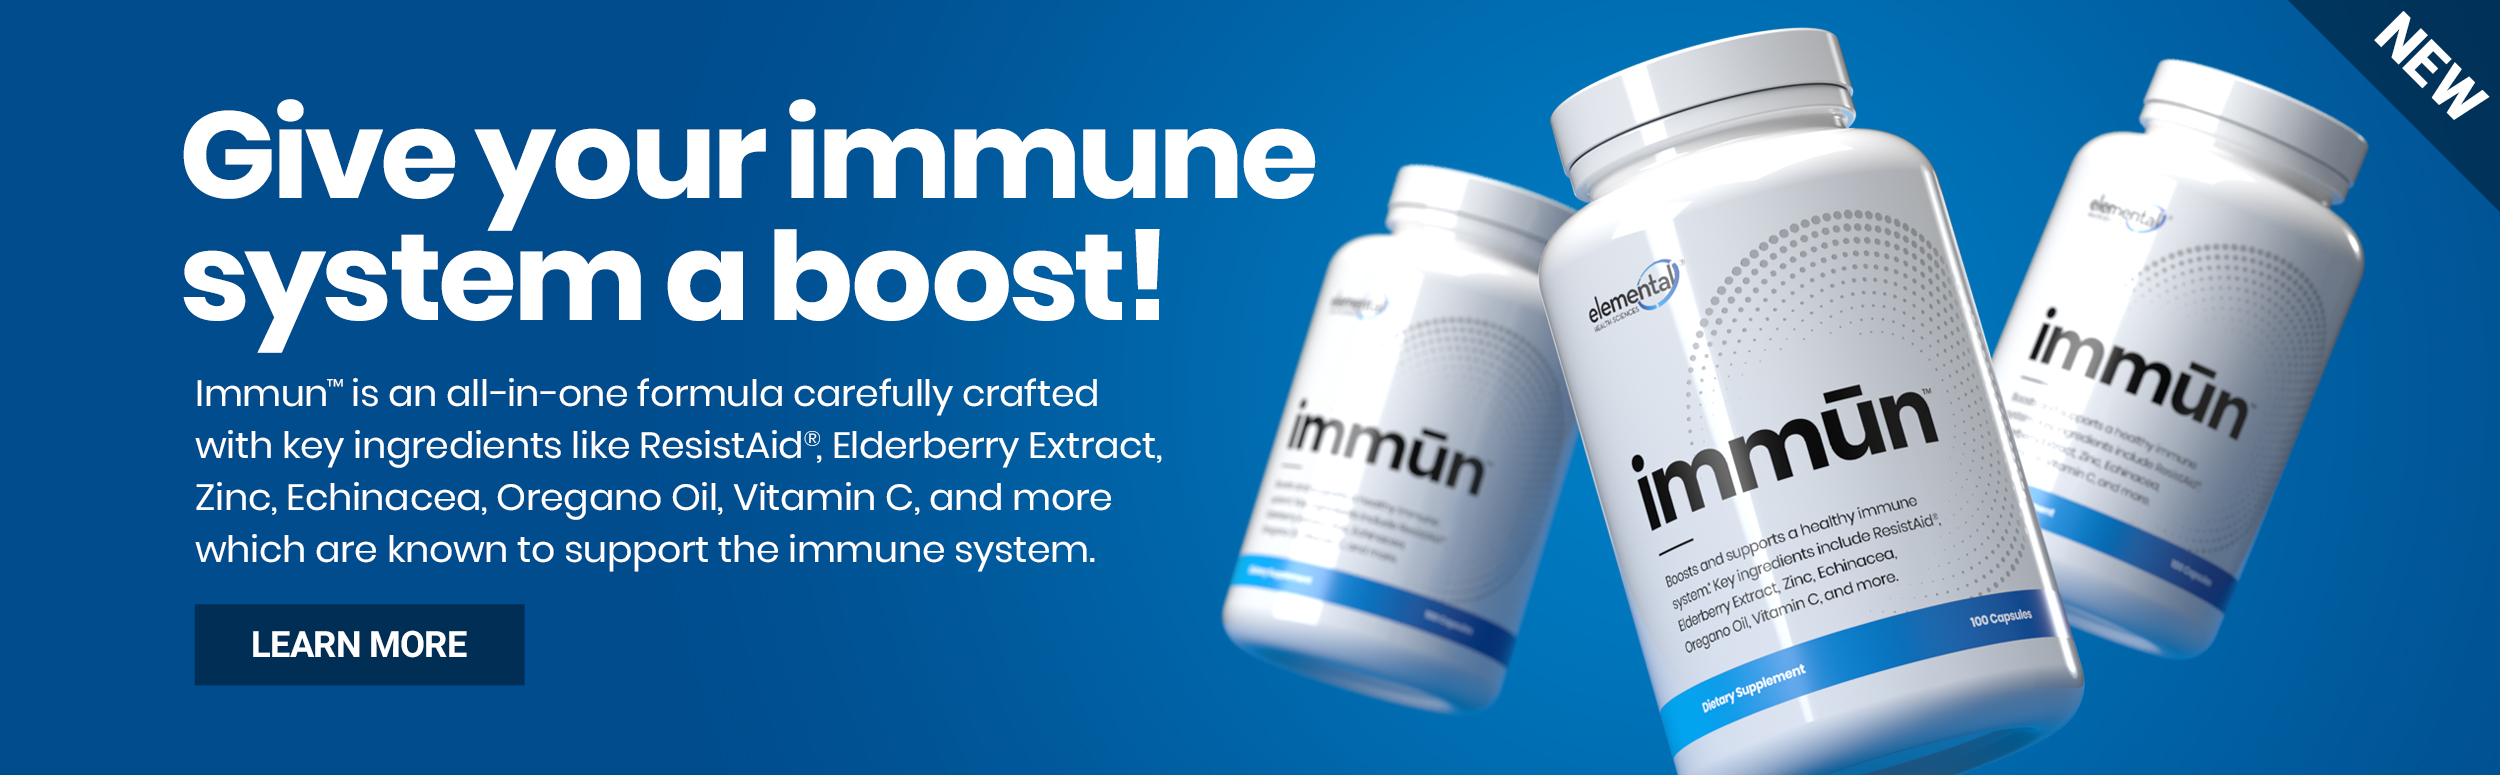 elemental -immun - give your immune system a boost! click to learn more